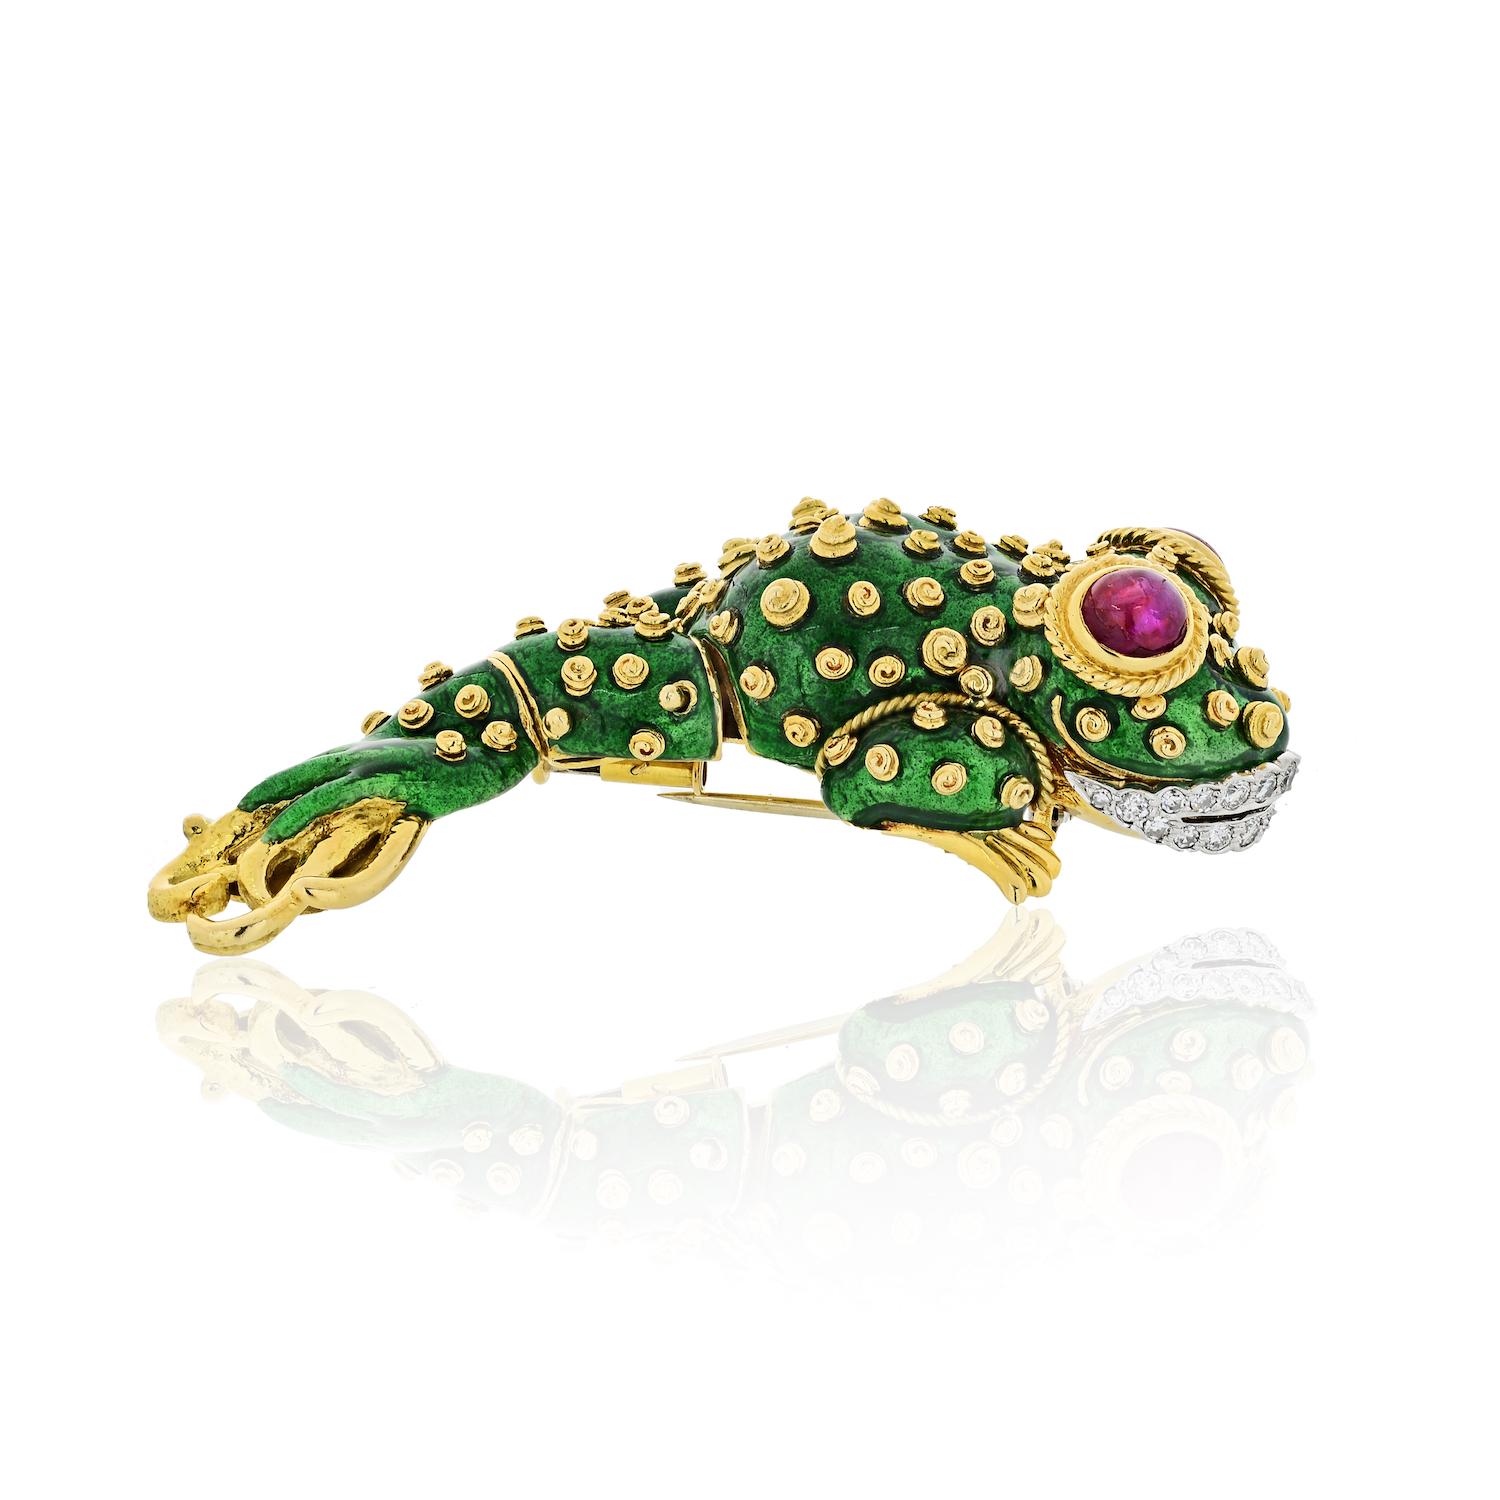 Questions? Call us anytime!
The Back Vault NYC.
833,998,2858

18 kt., the stylized tadpole applied with green enamel and applied gold spiral spots, with two collet-set oval cabochon ruby eyes further edged by twisted gold, its platinum lips set with